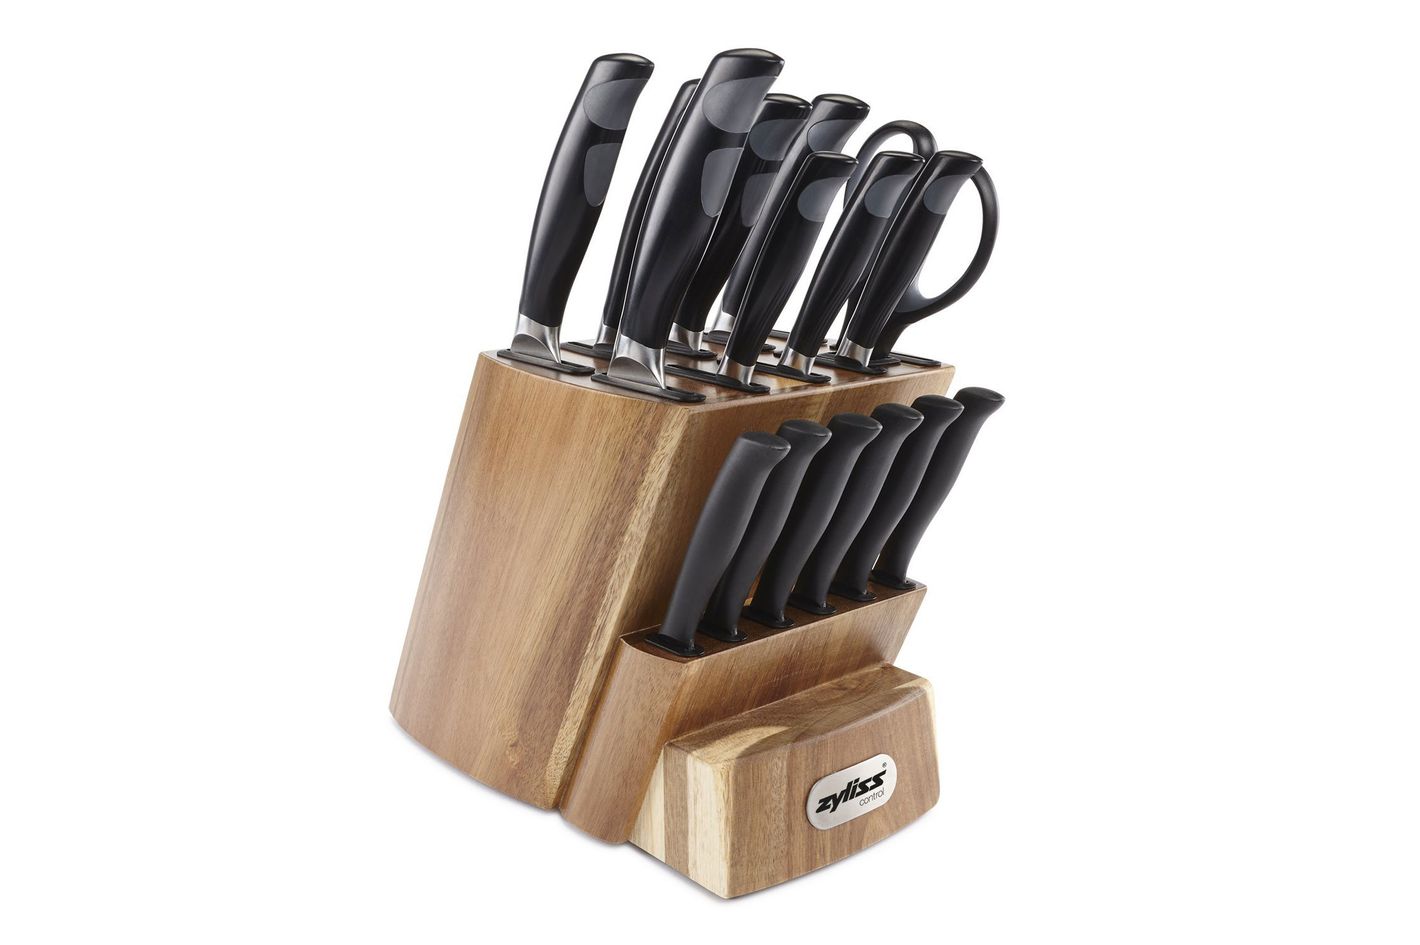 11 Best Kitchen Knife Sets And Reviews 2018